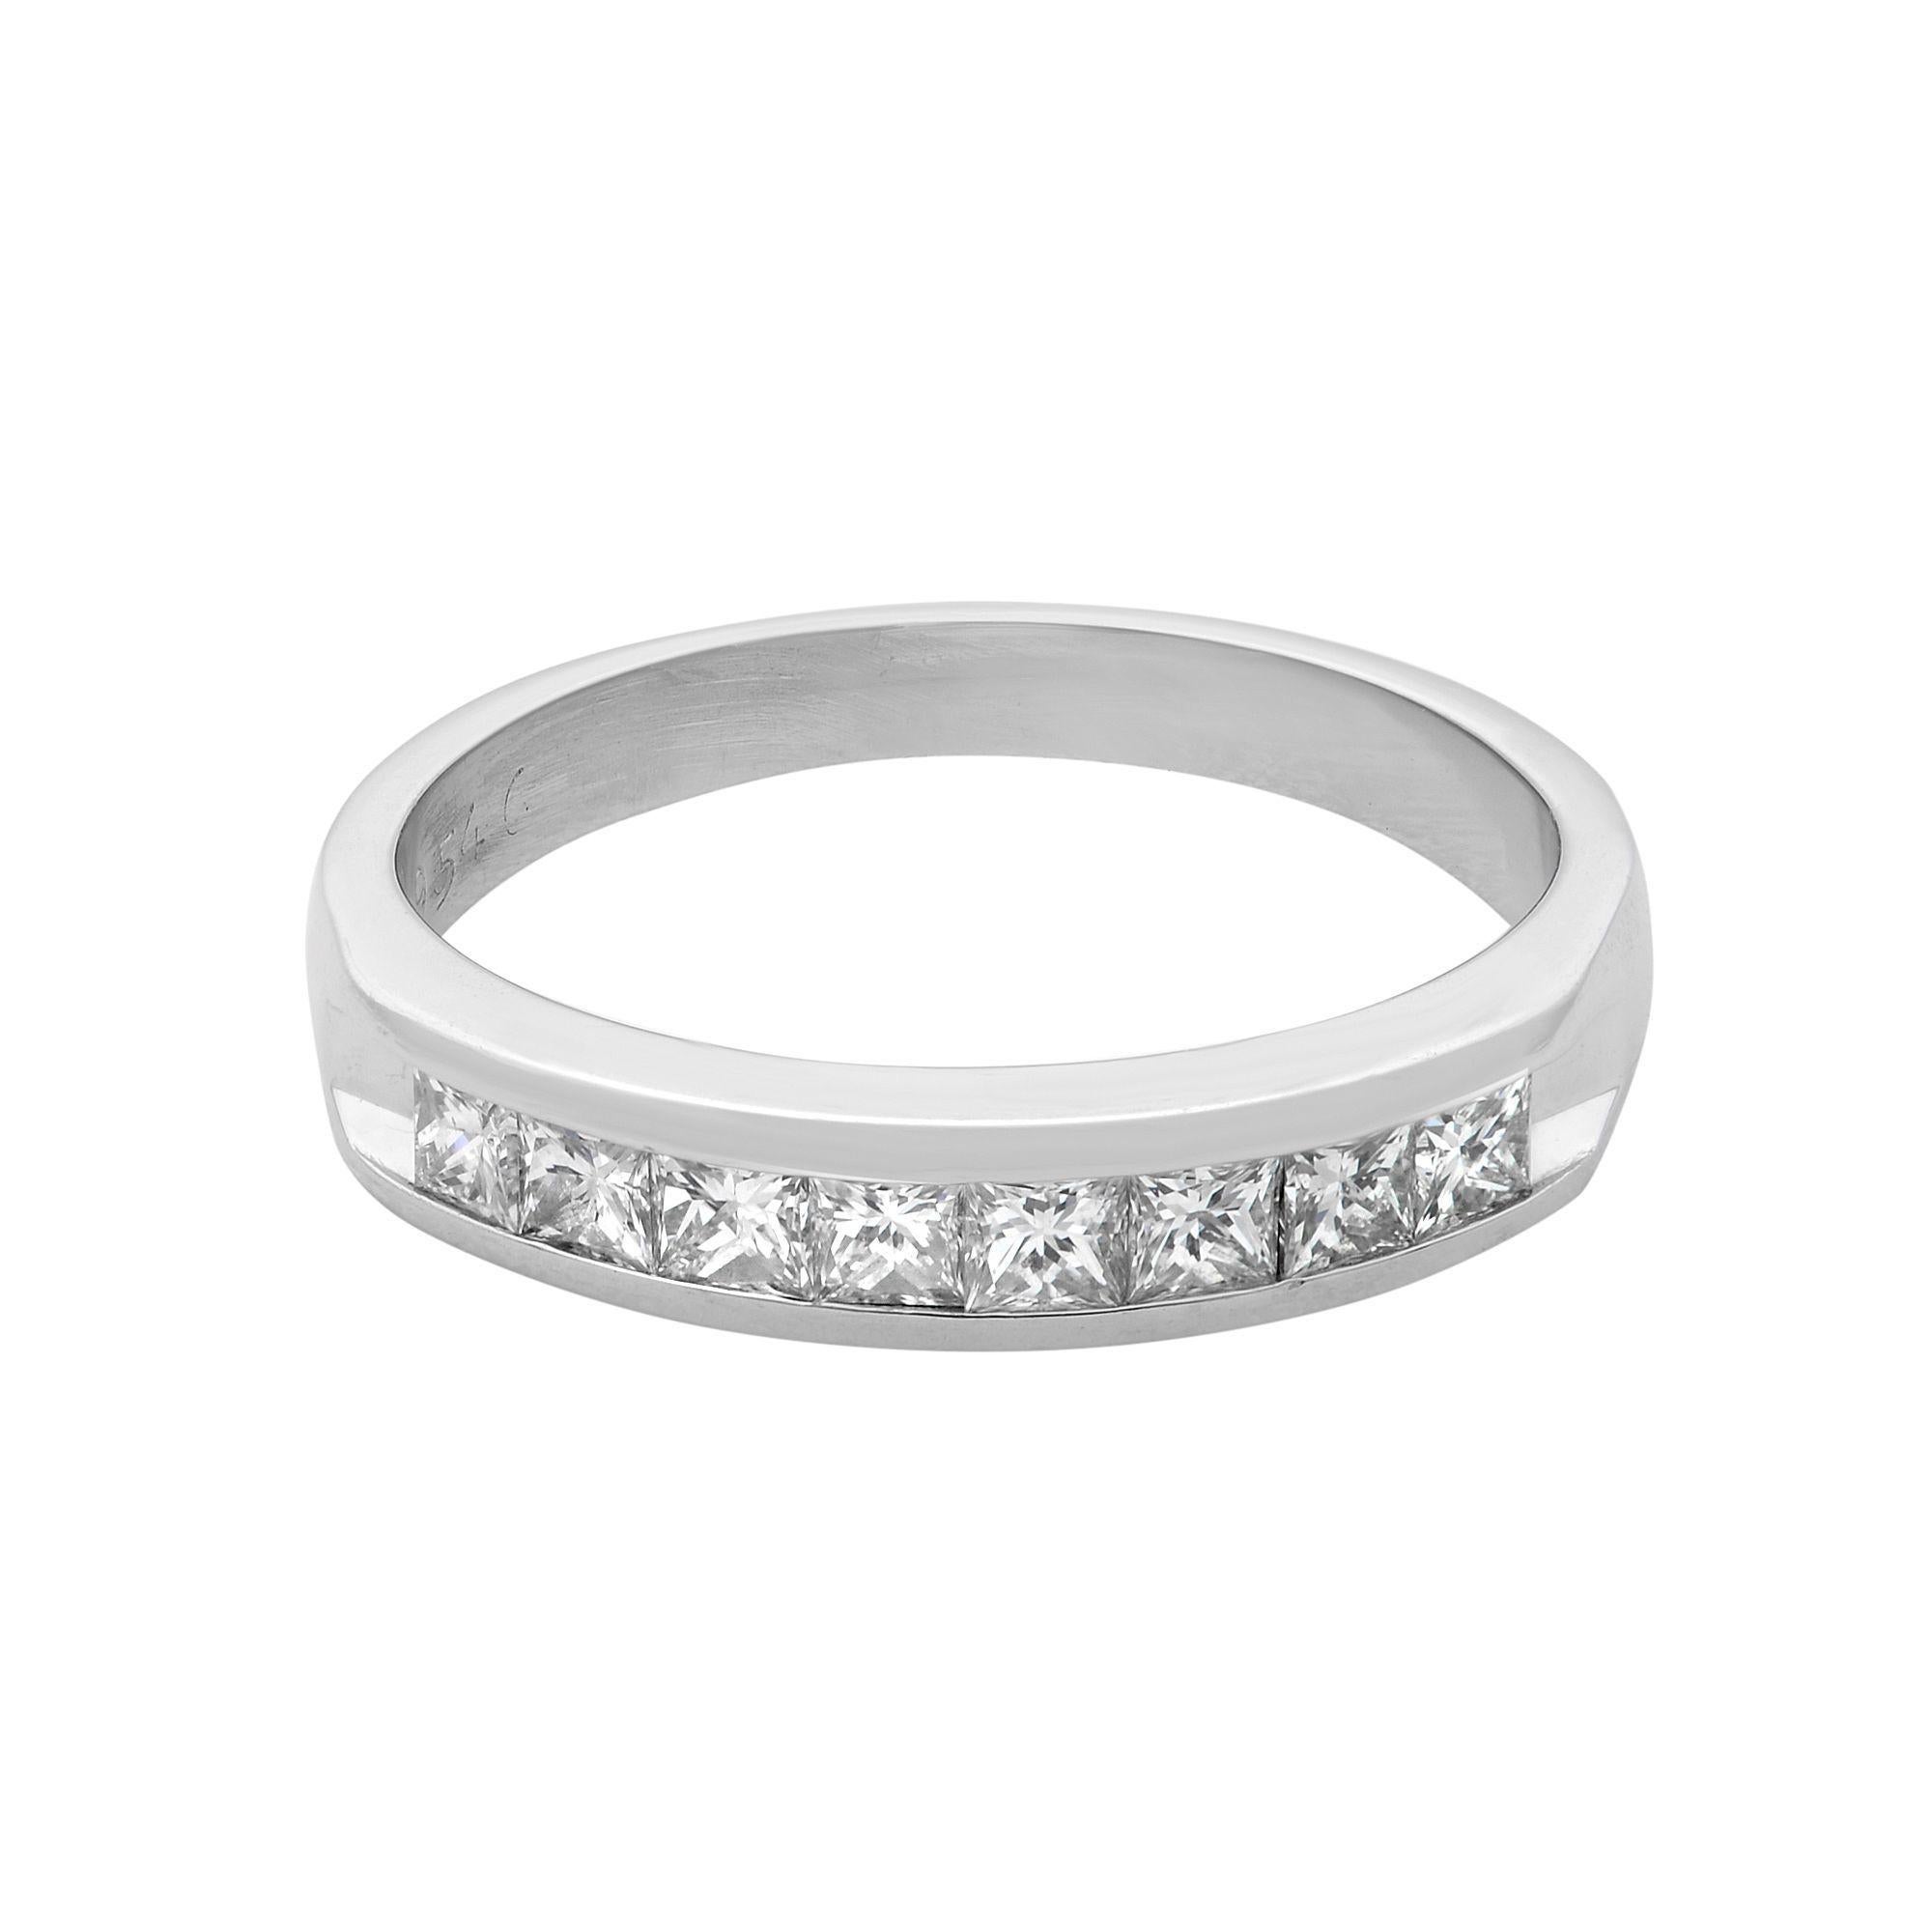 A platinum ring with channel set princess-cut diamonds is a beautiful take on a classic style. Ideal as a wedding ring or as an anniversary gift. This ring features 0.40 carats in total with 8 beautifully crafted princess cut stones. Ring width: